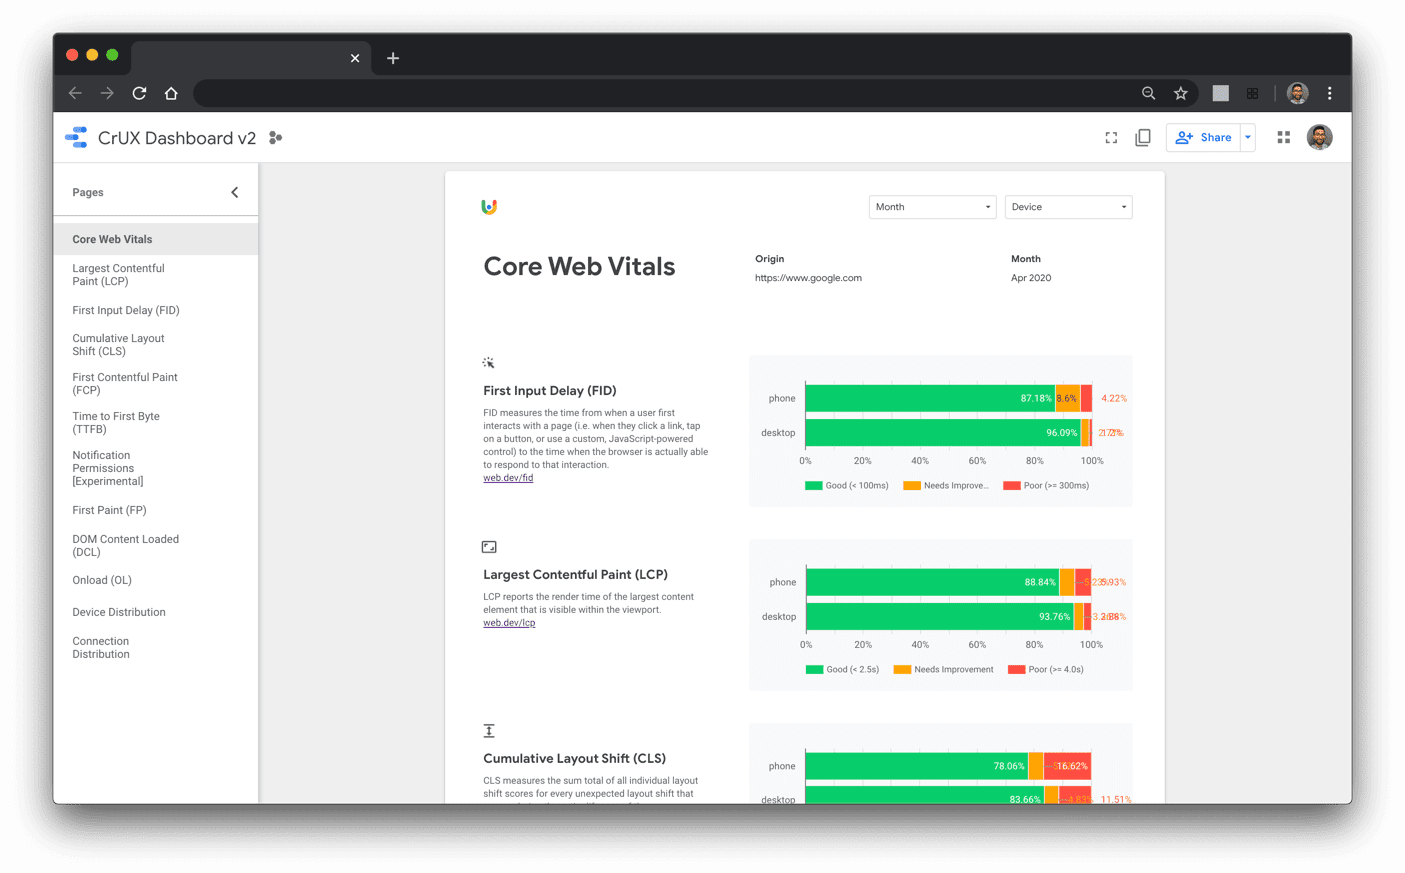 Chrome UX Report dashboard displaying the Core Web Vitals metrics in a new landing page